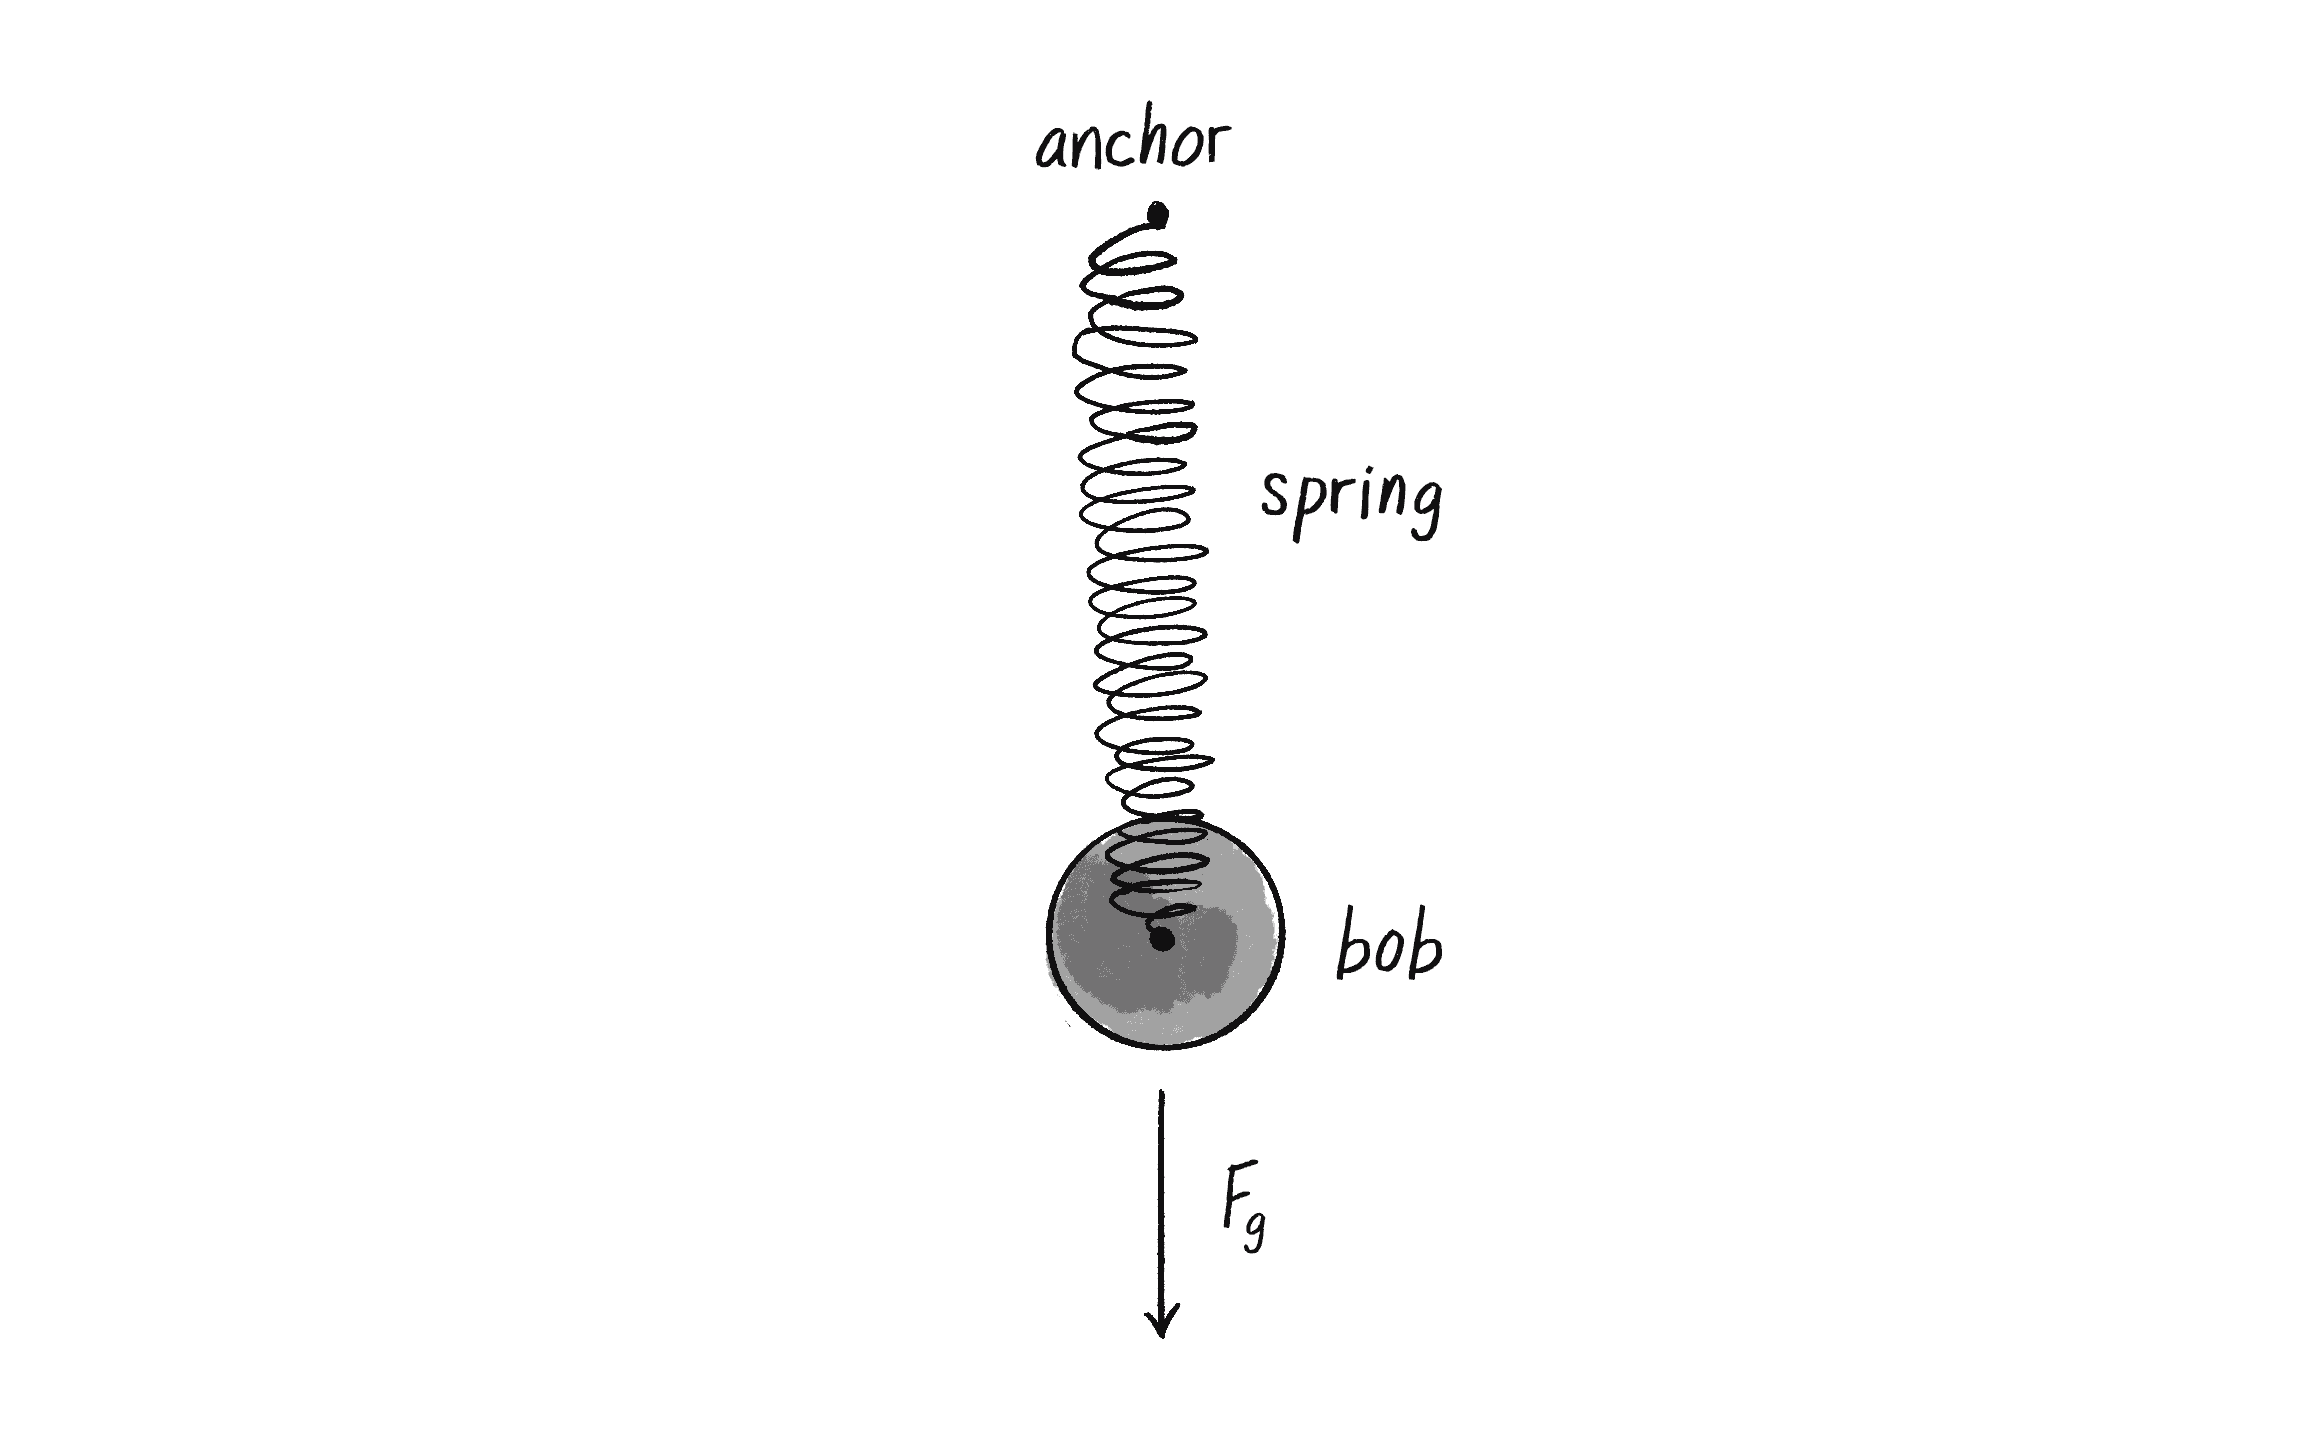 Figure 3.11: A spring with an anchor and bob.